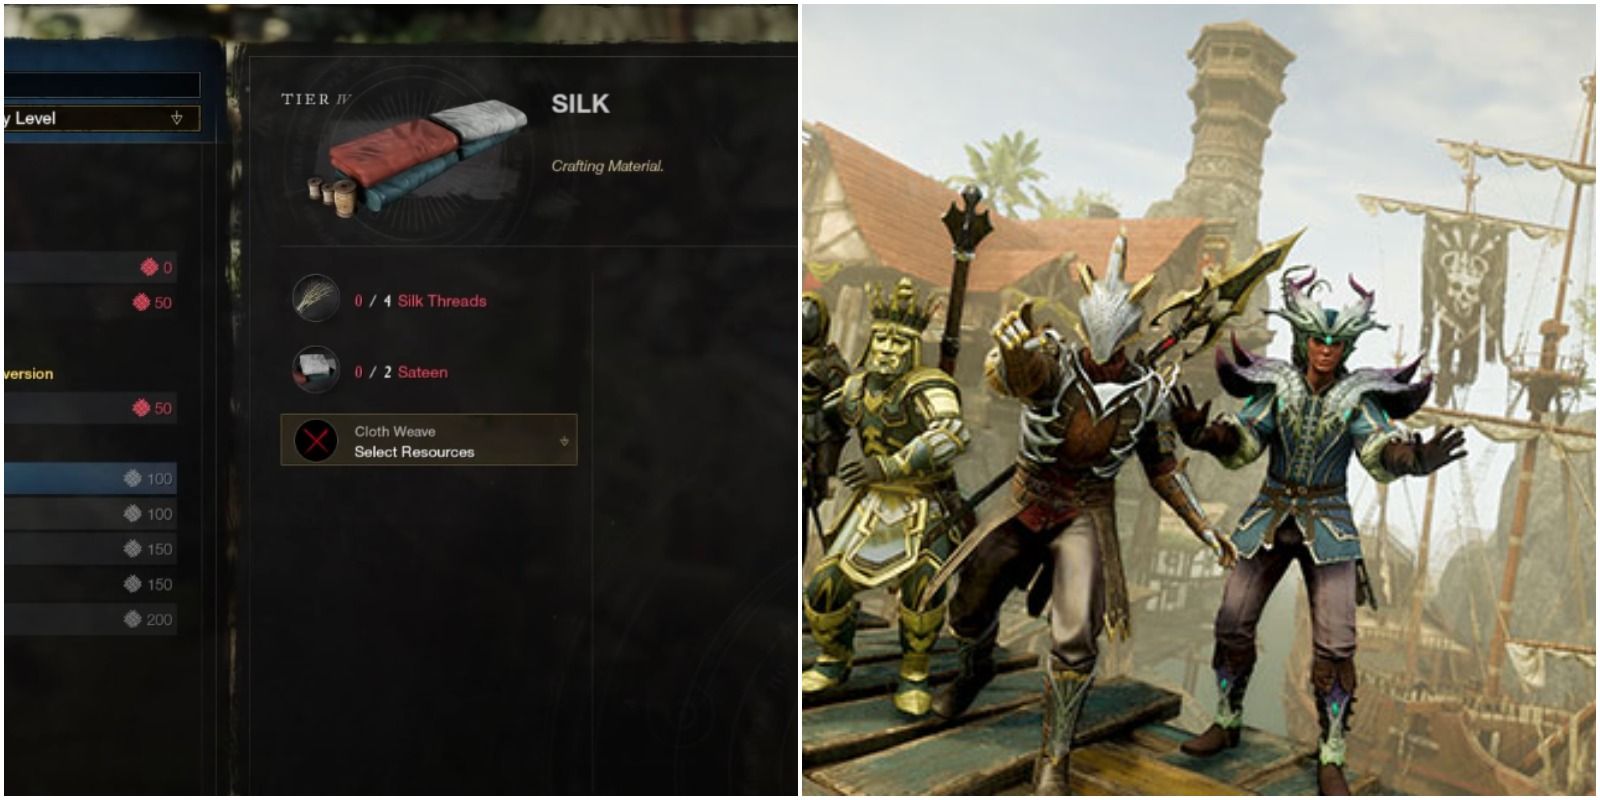 silk in the menu and new armor sets.